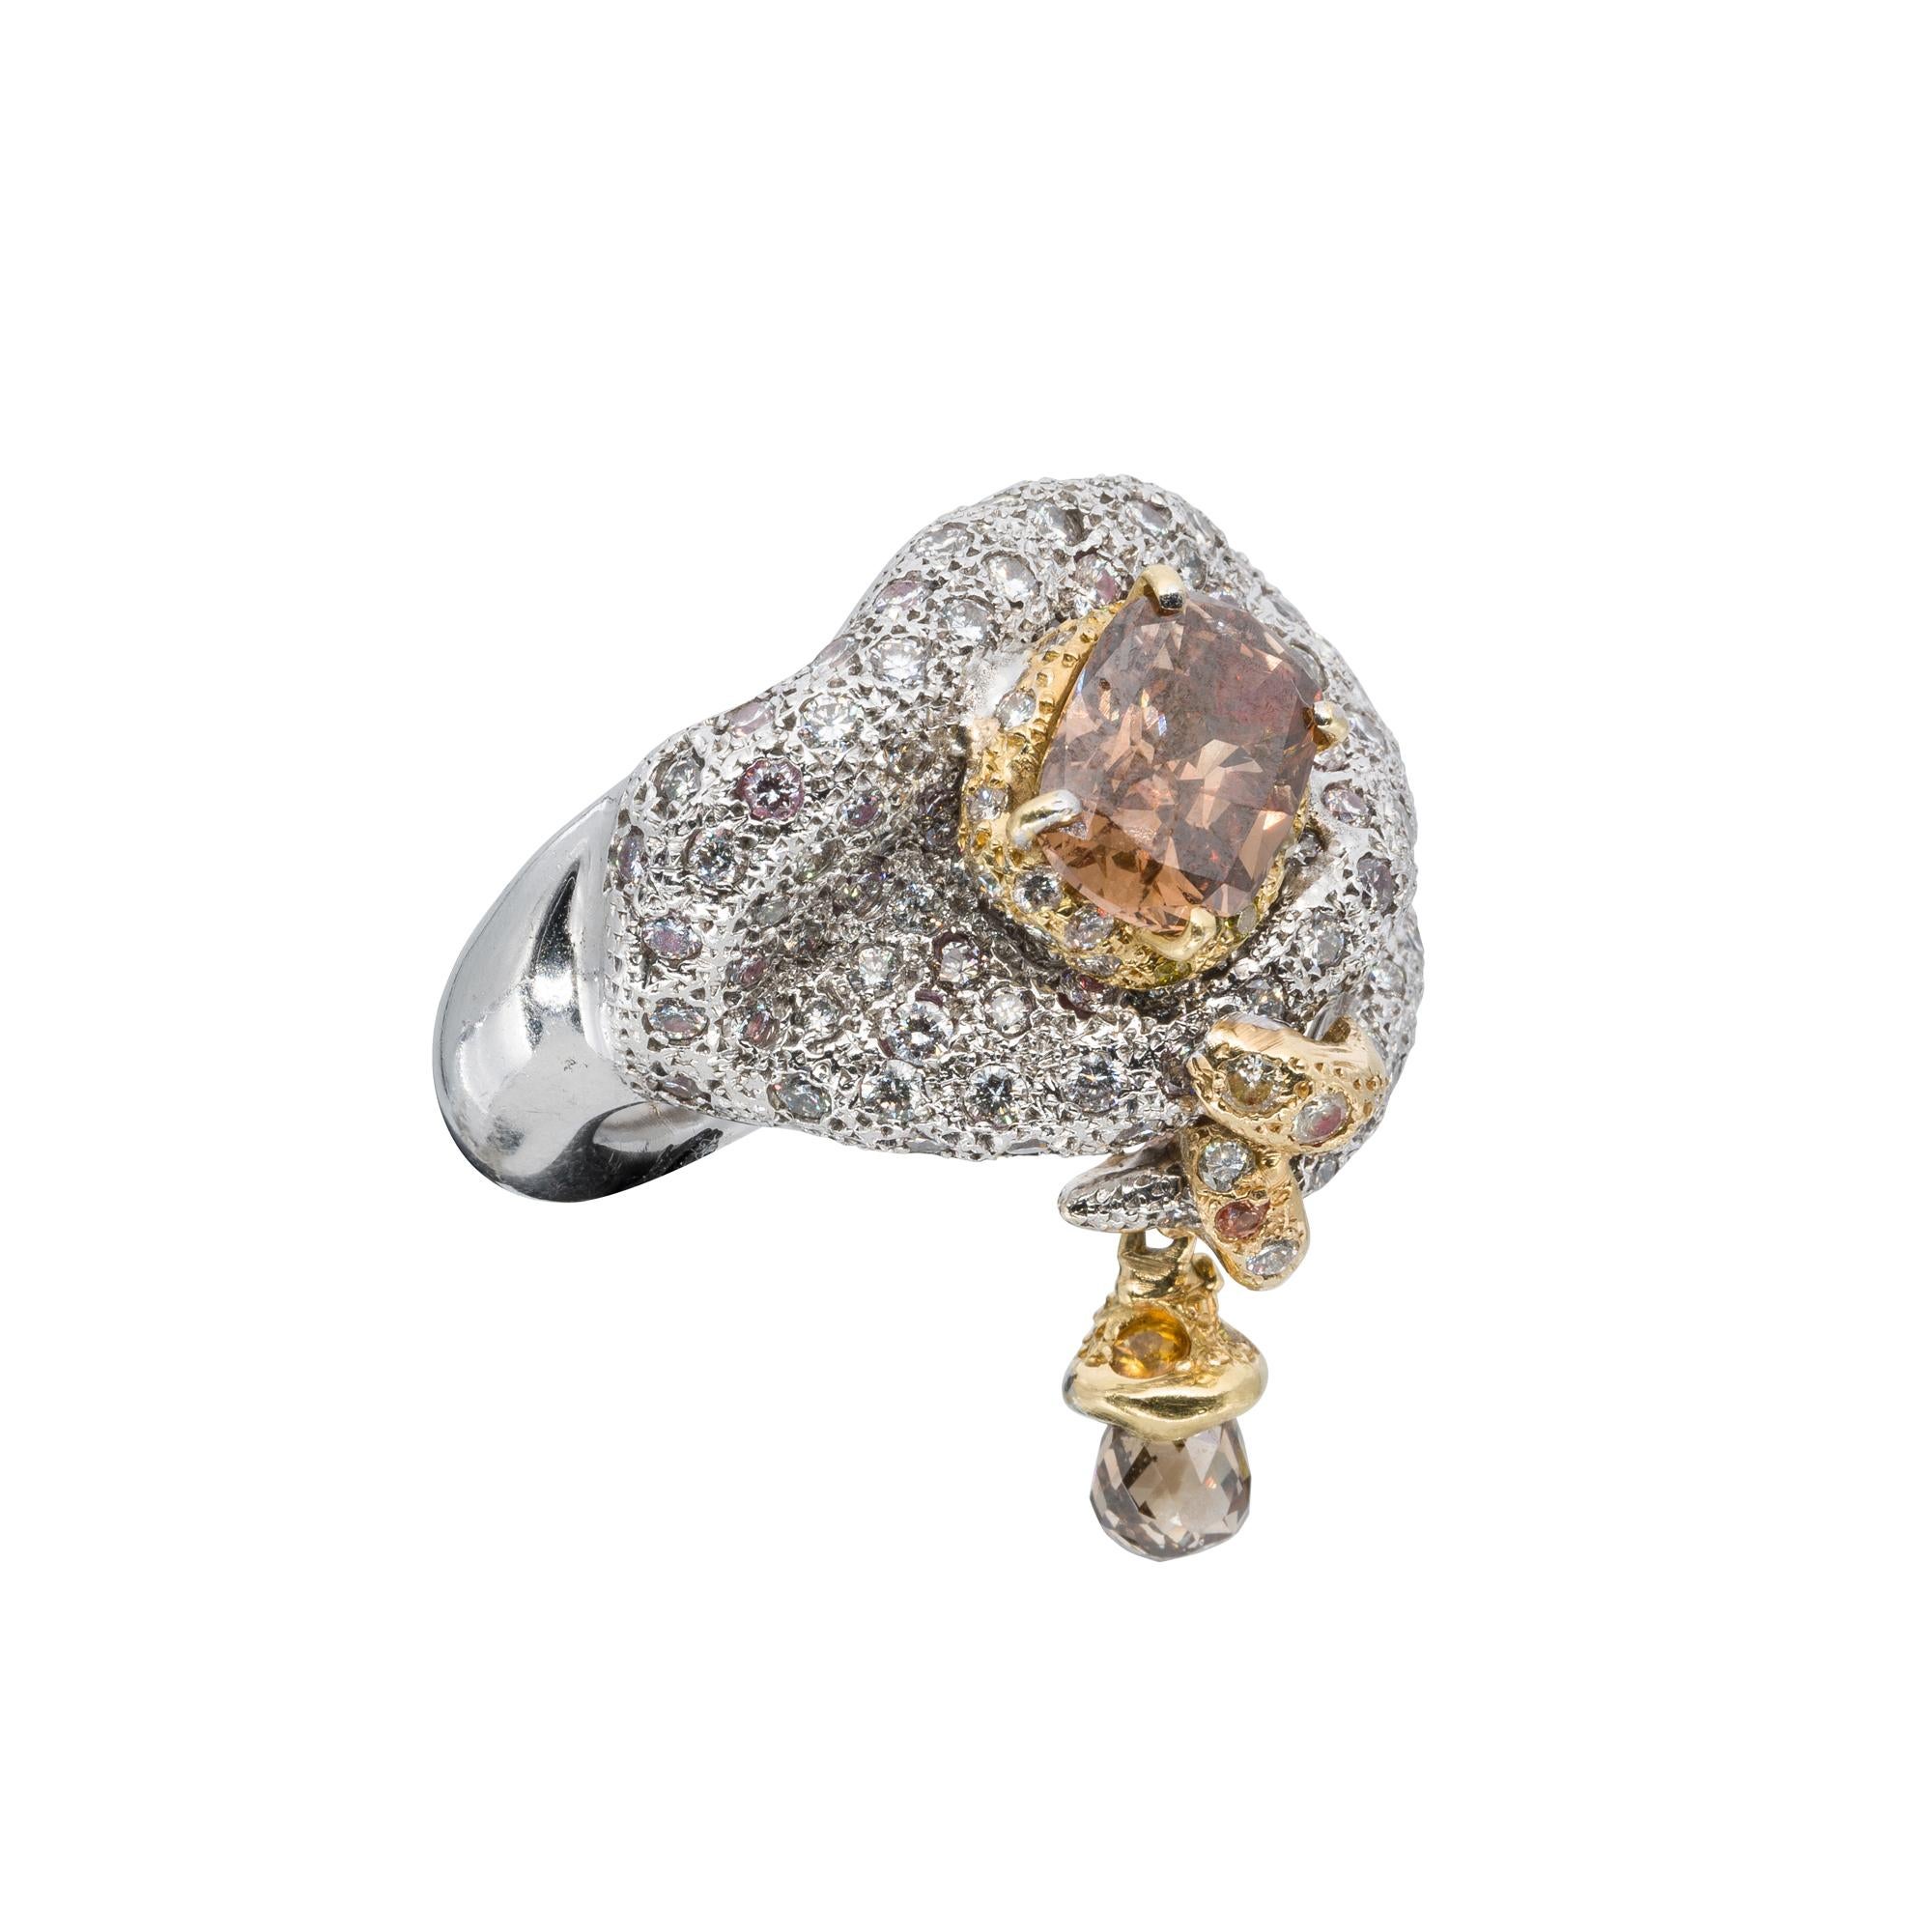 A Ring from d'Avossa Masterpiece Collection in white and yellow 18 kt gold with a Central Fancy Natural Cushion cut Cognac Diamond and a briolé pear shape diamond of the same color, dangling and giving to this Ring a touch of Movement and